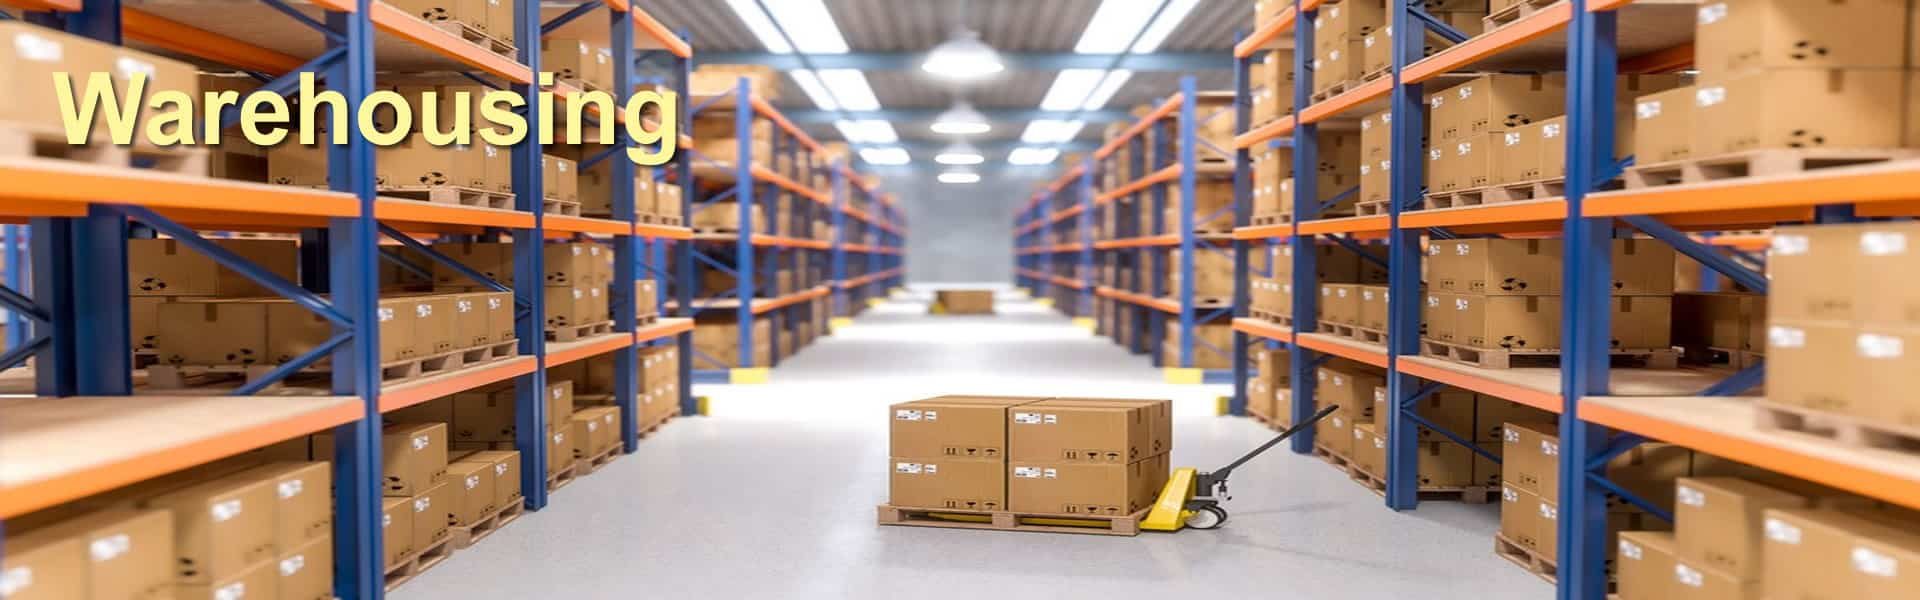 Warehousing services in China